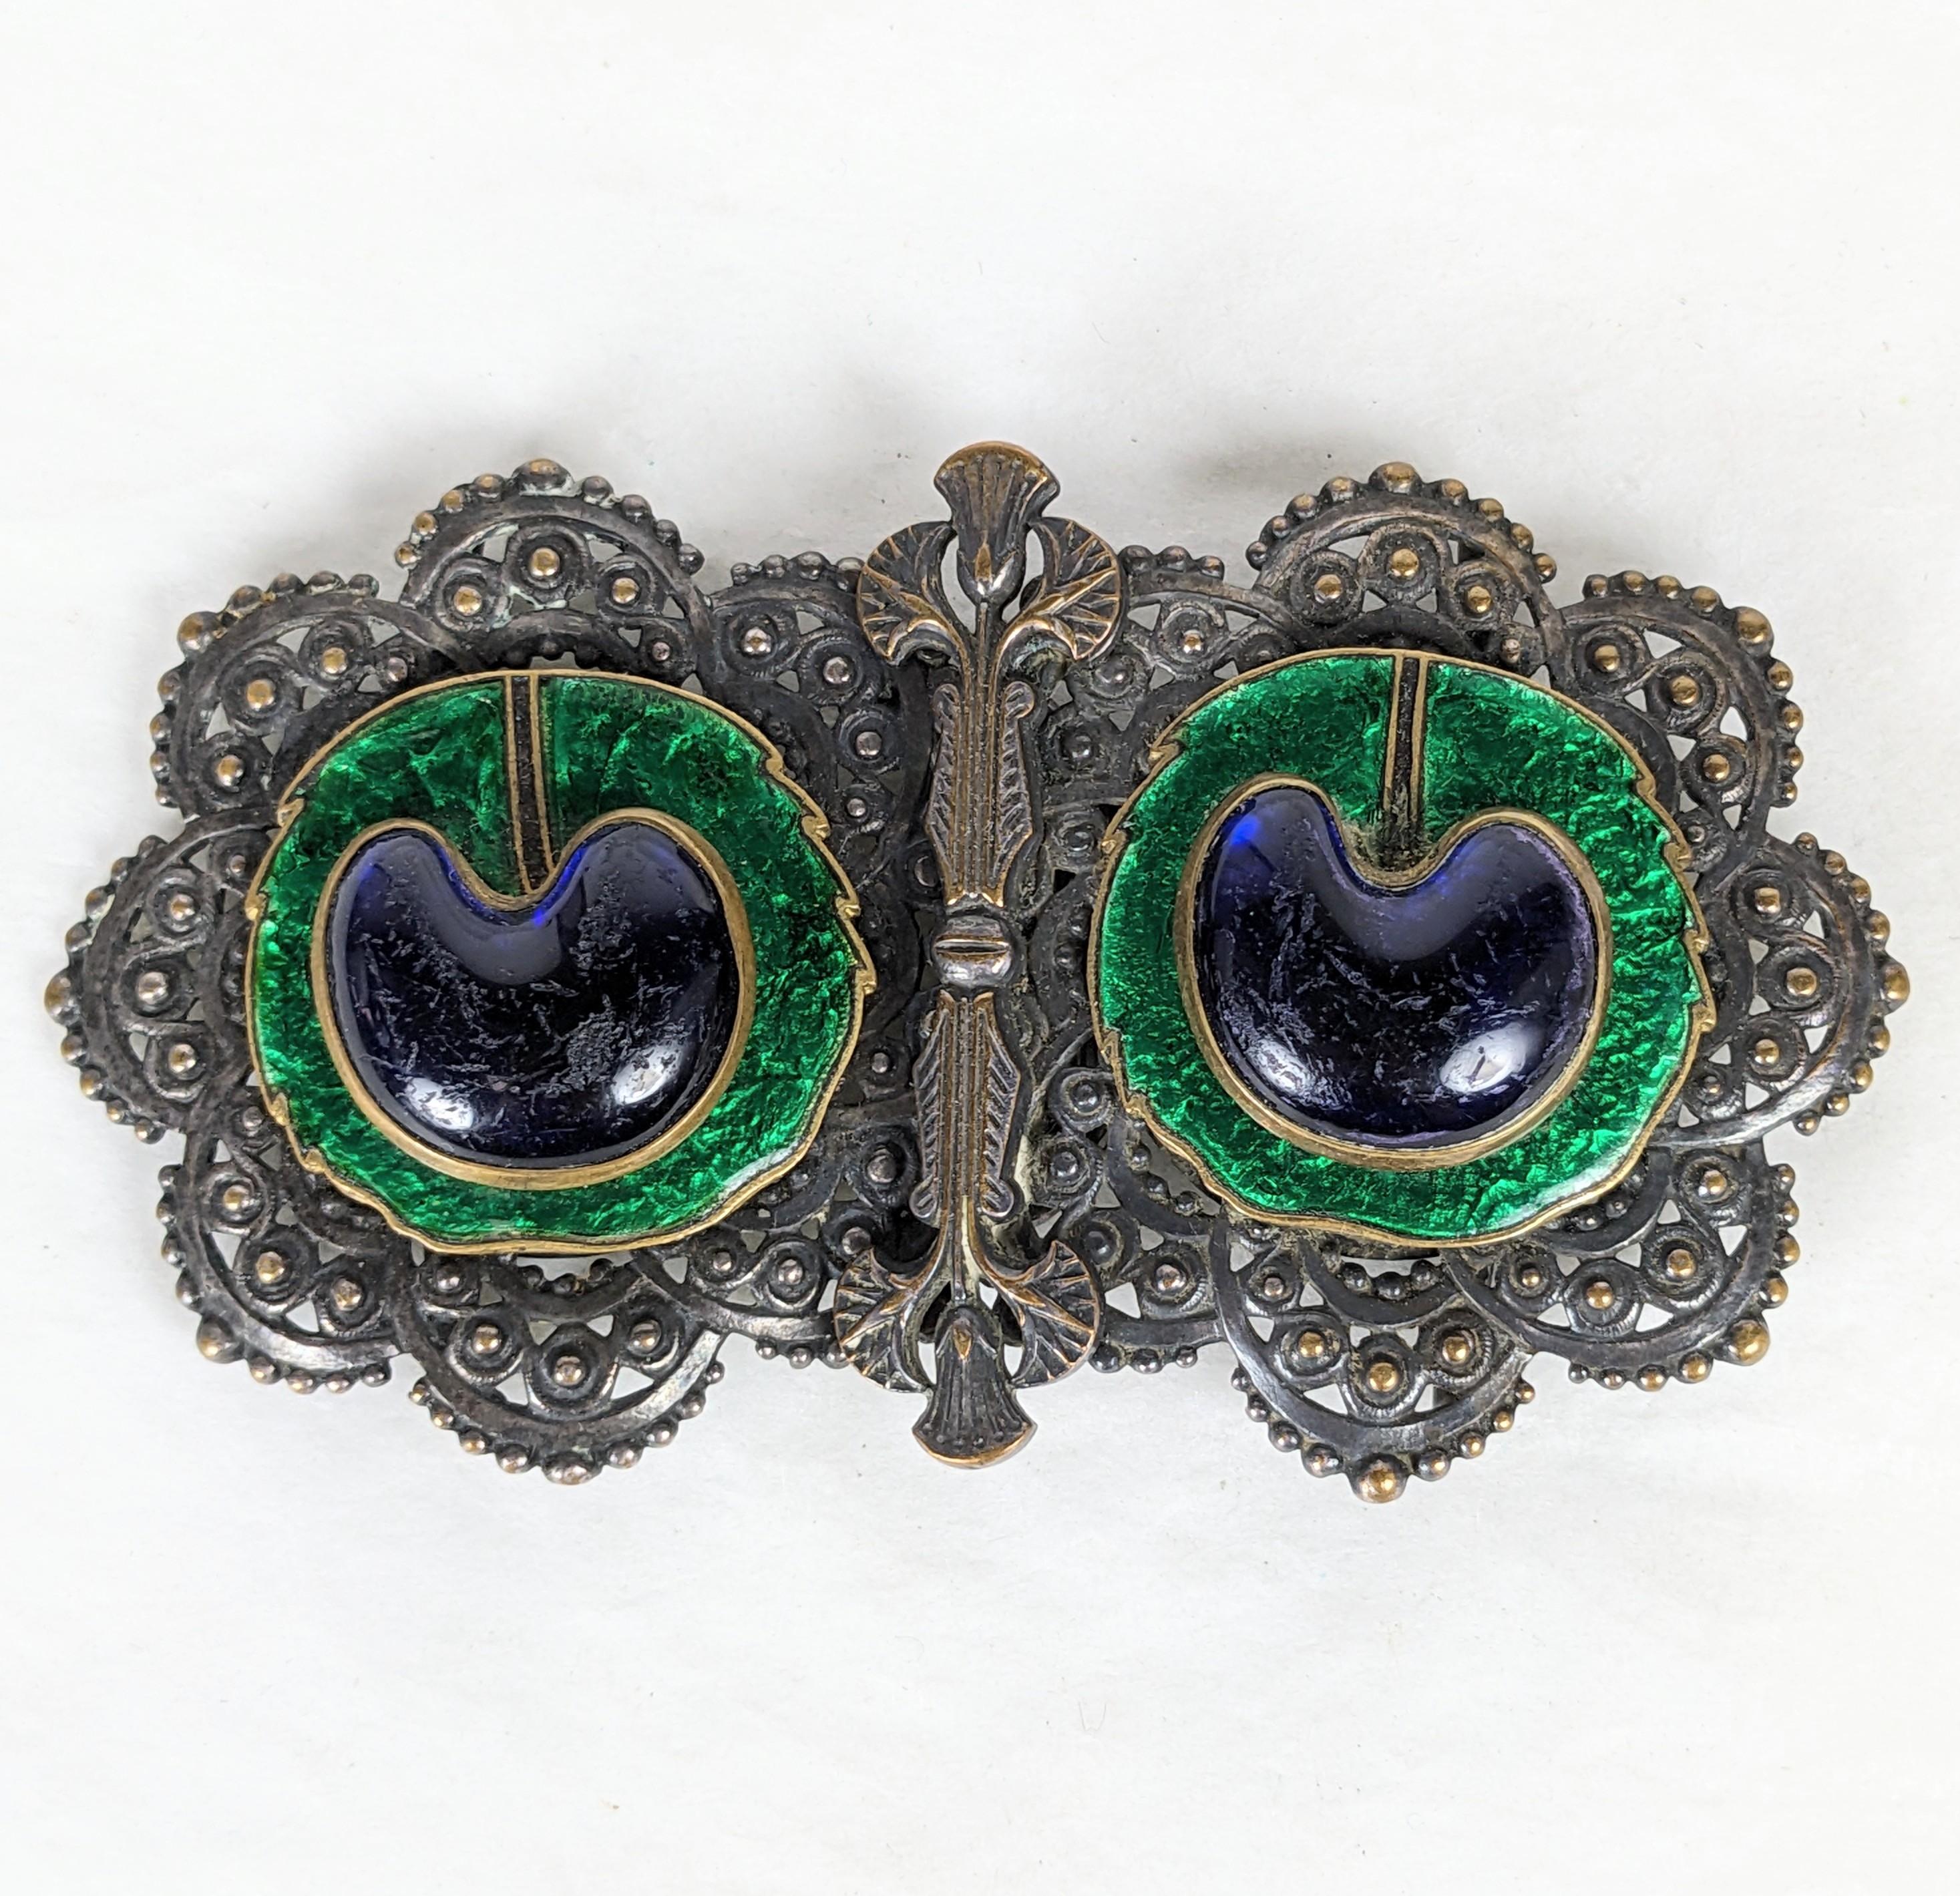 Art Nouveau Piel Freres Peacock Eye Egyptian Revival Buckle from the 1920's France. Silverplated brass with Egyptian Lotus motifs set with sapphire poured glass peacock eyes on green enamel. Signed PF. 1920's France. 3.5